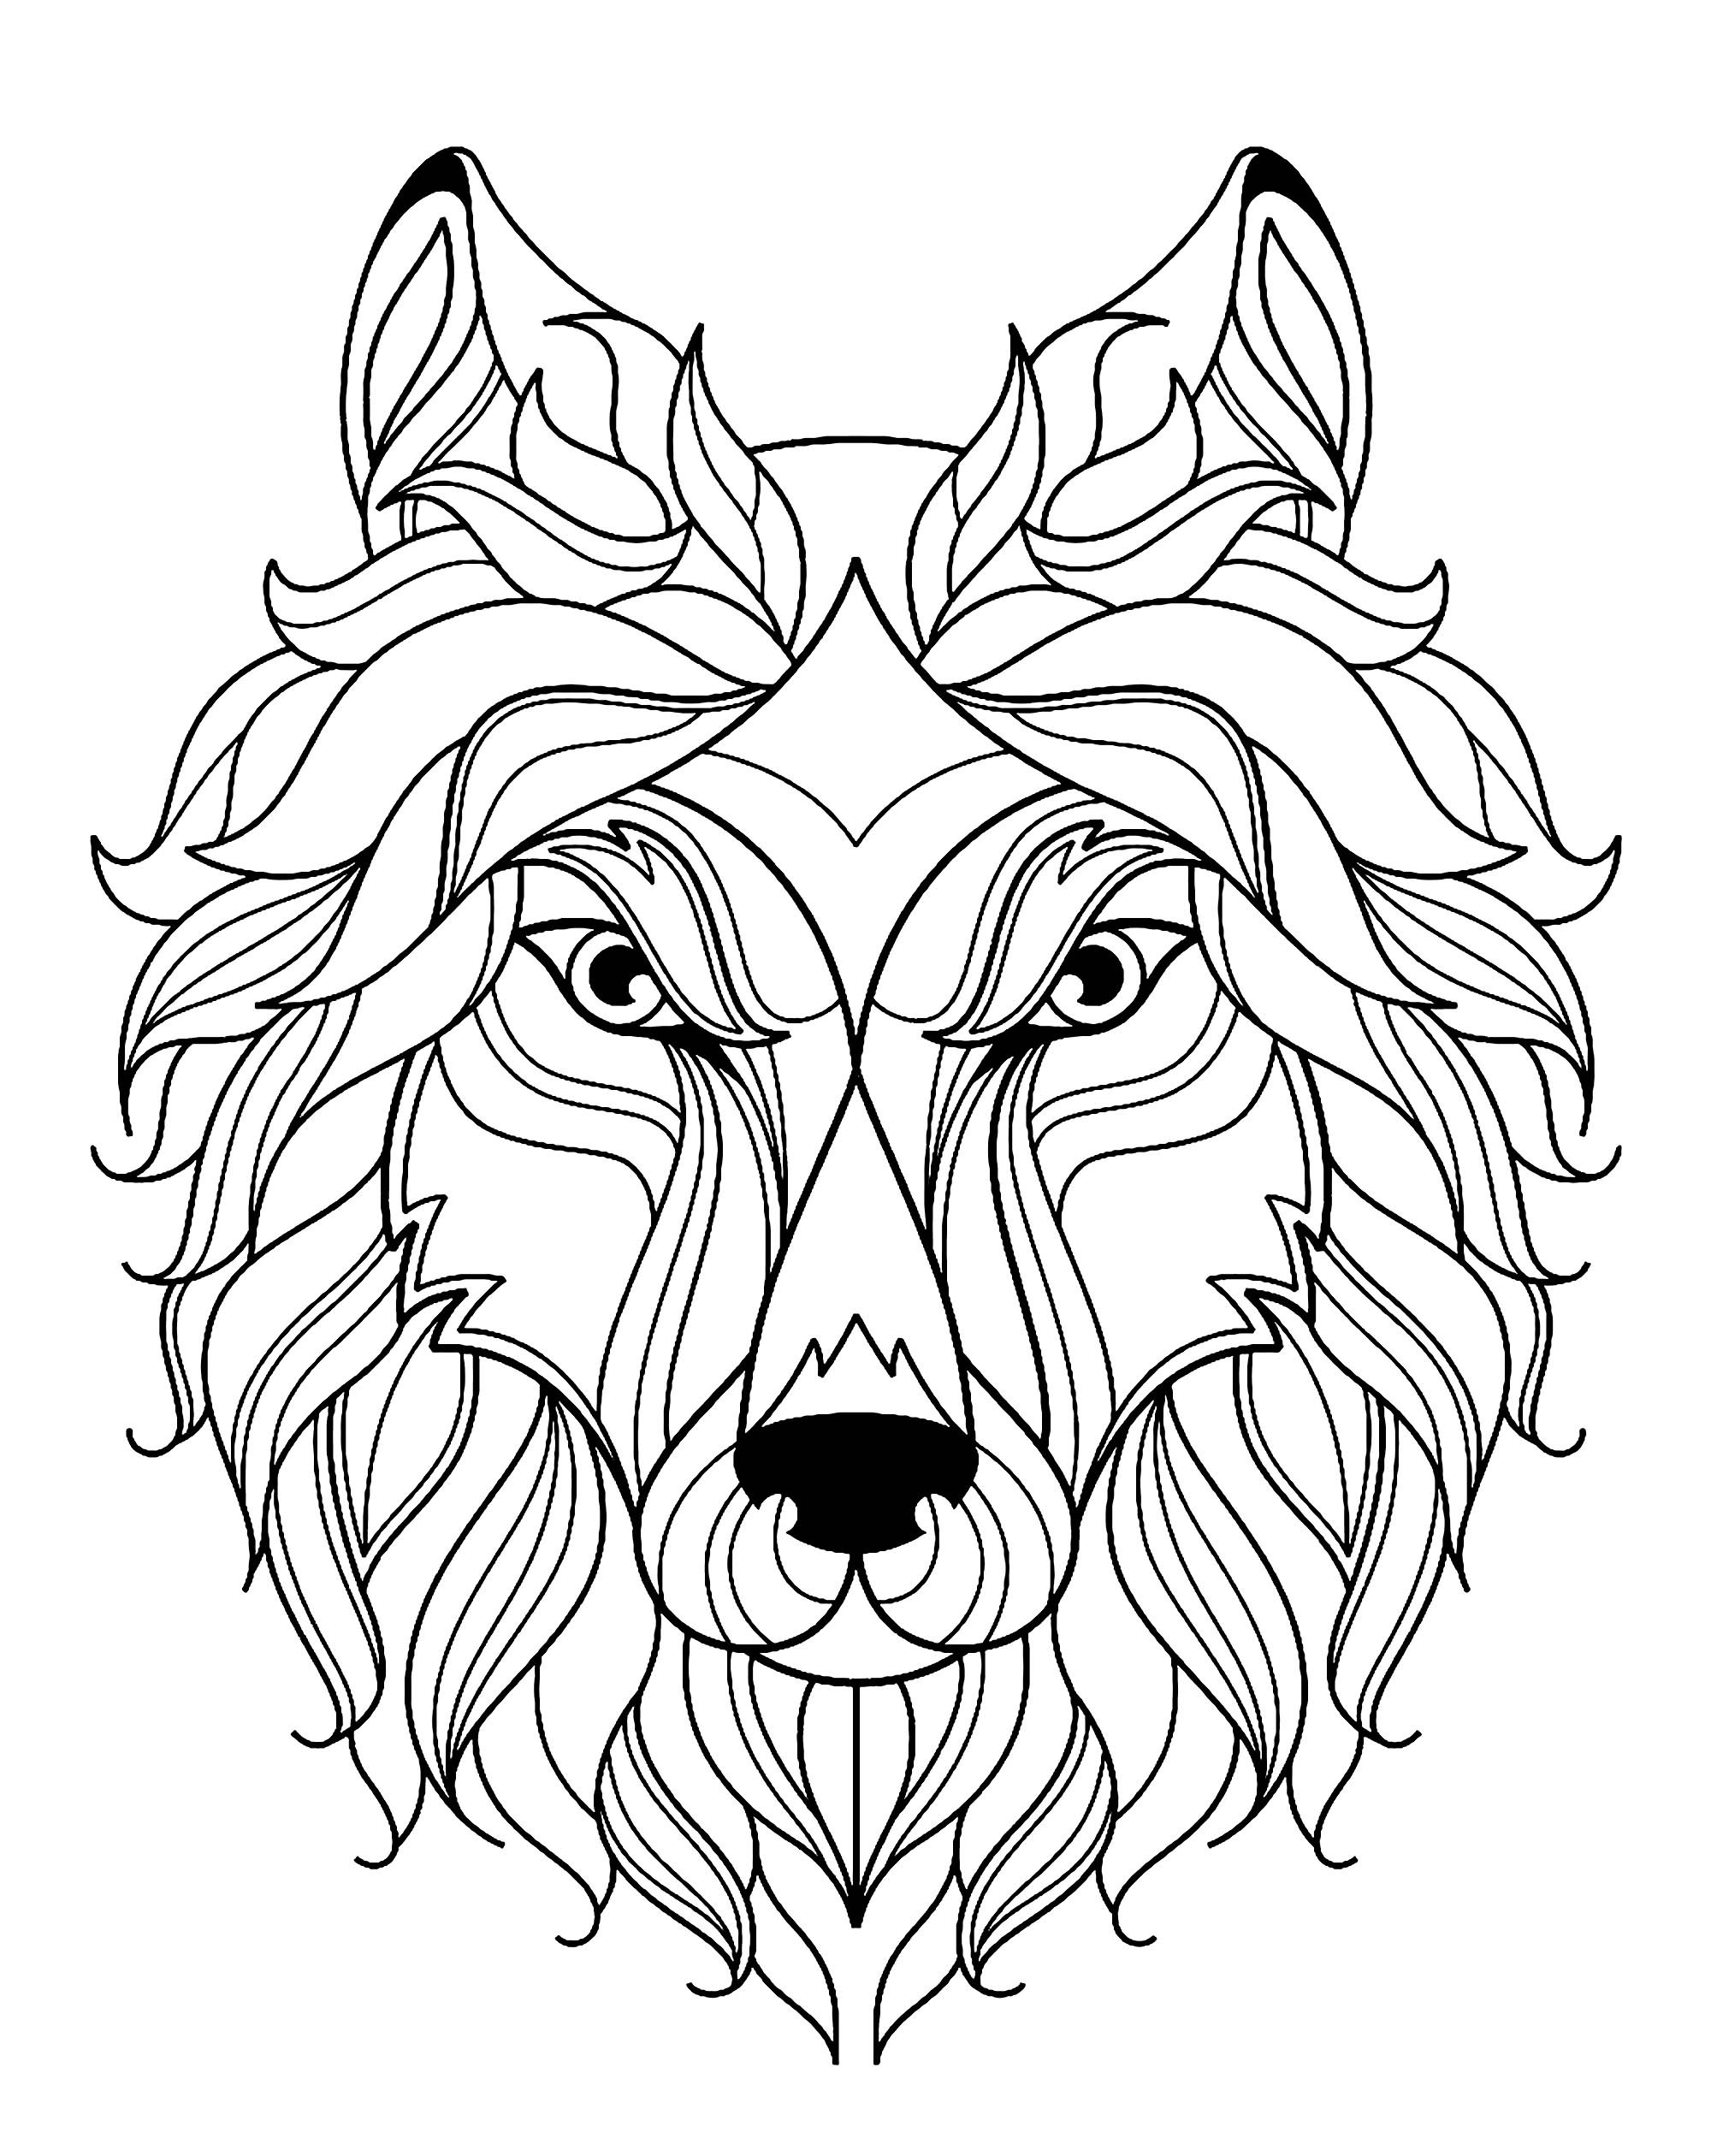 Wolf Coloring Pages For Adults
 Big wolf head simple Wolves Adult Coloring Pages